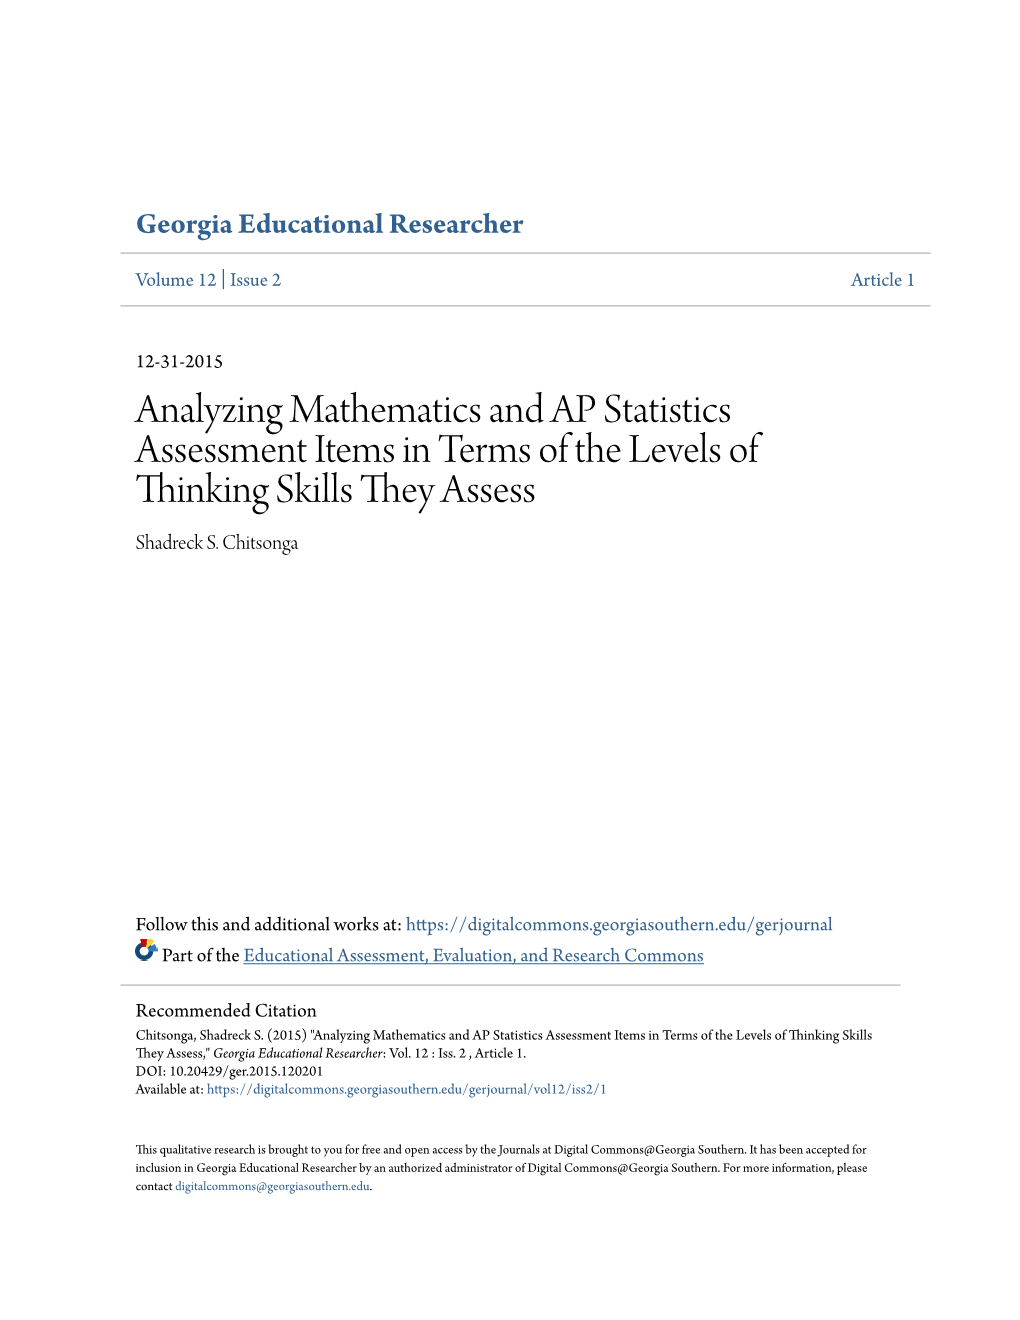 Analyzing Mathematics and AP Statistics Assessment Items in Terms of the Levels of Thinking Skills They Assess Shadreck S